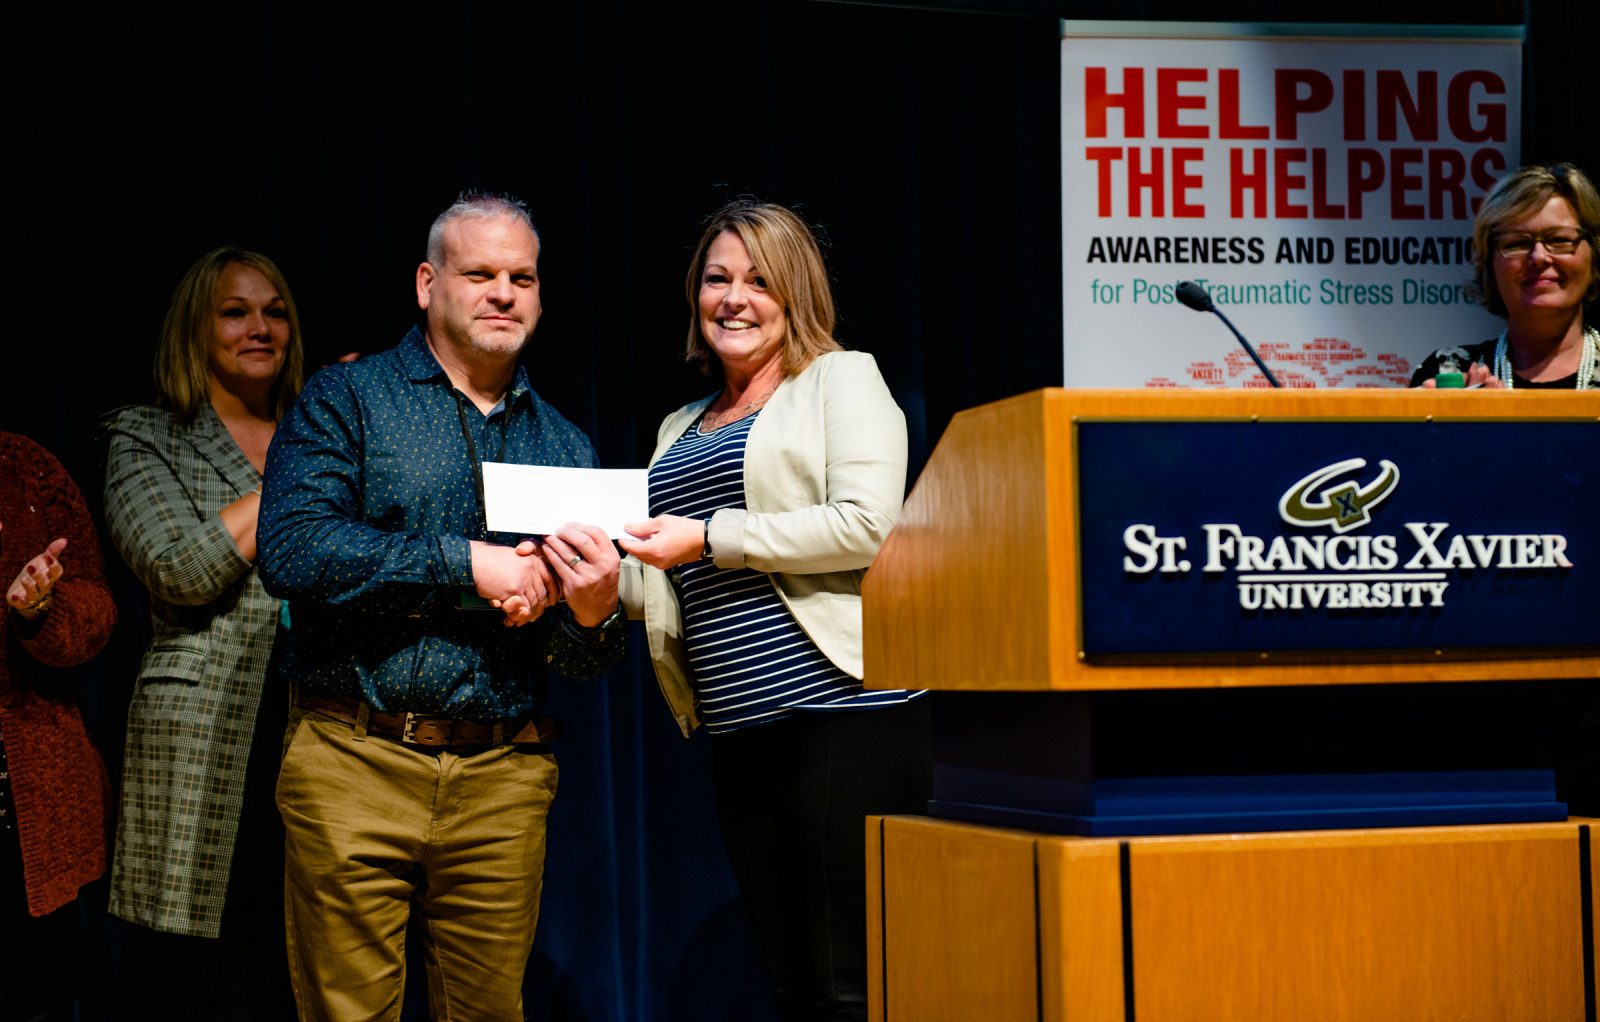 6th Annual 'Helping the Helpers’ Awareness and Education Day For Post-Traumatic Stress Disorder